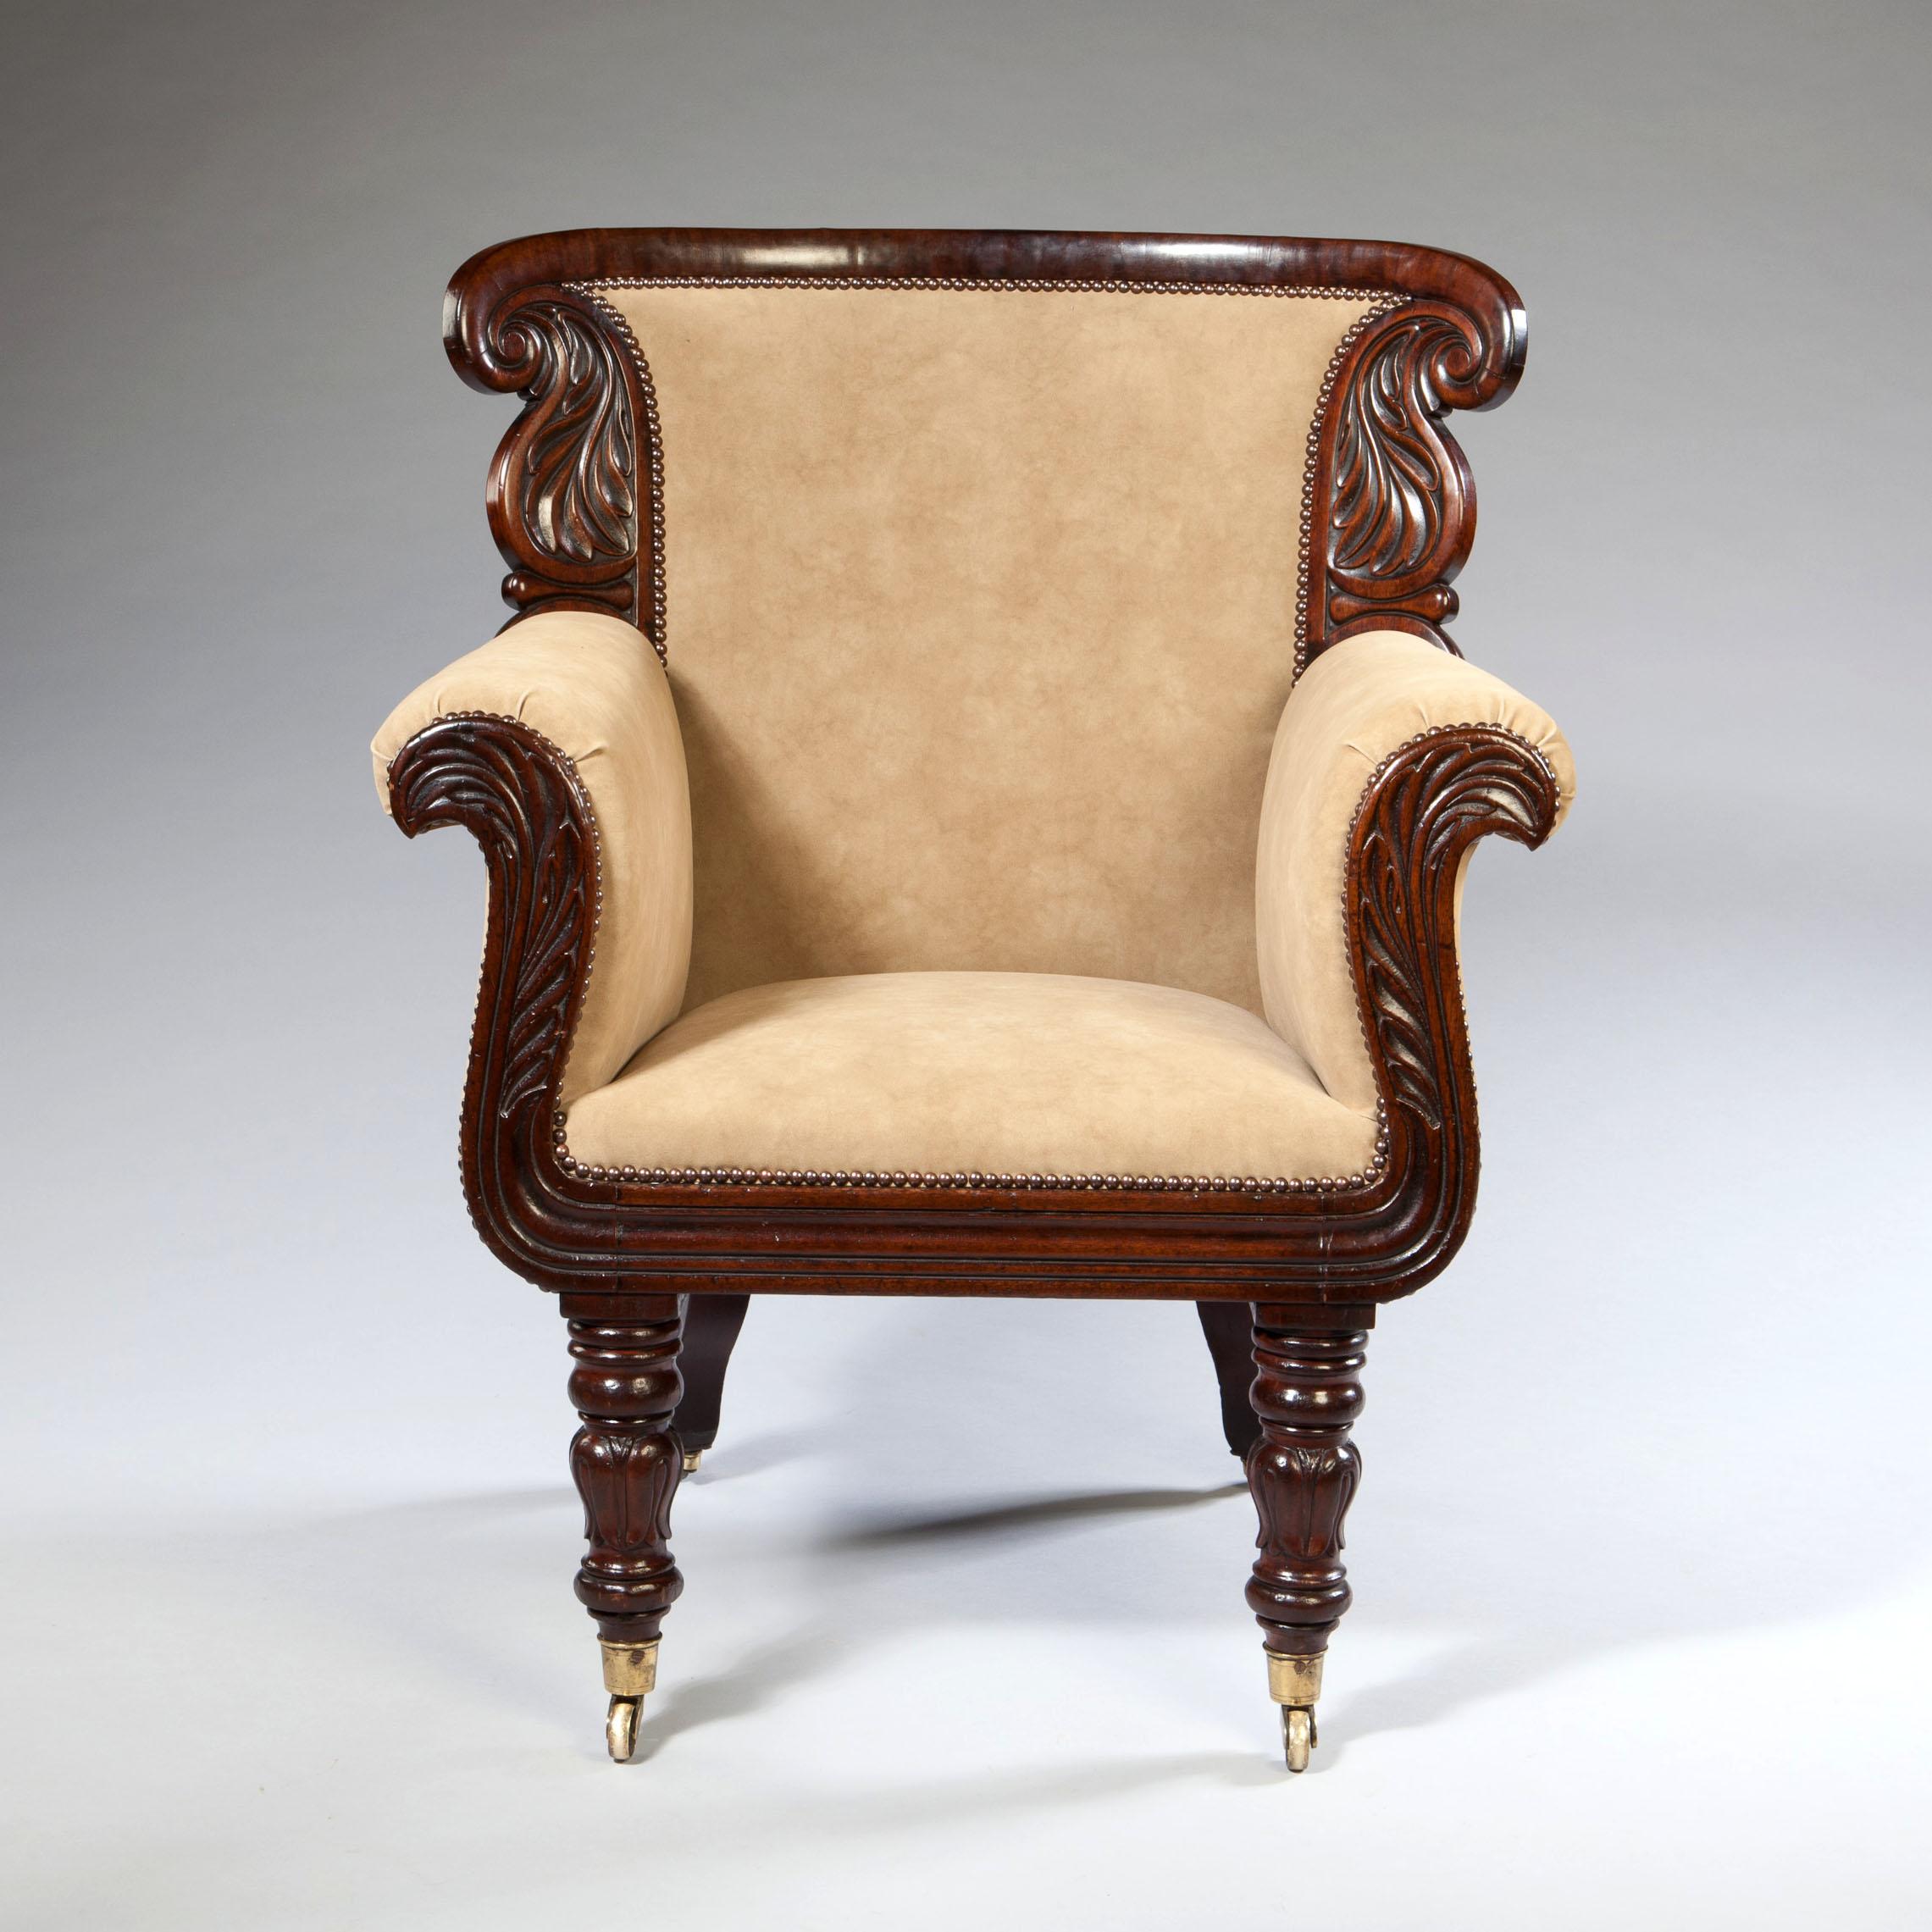 A fine mid 19th century mahogany armchair of generous scale with boldly carved frame of acanthus levels supported on tapering legs terminating in brass castors. Upholstered in beige suede. 

Height     103.00cm
Width      85.00cm
Depth      71.00cm